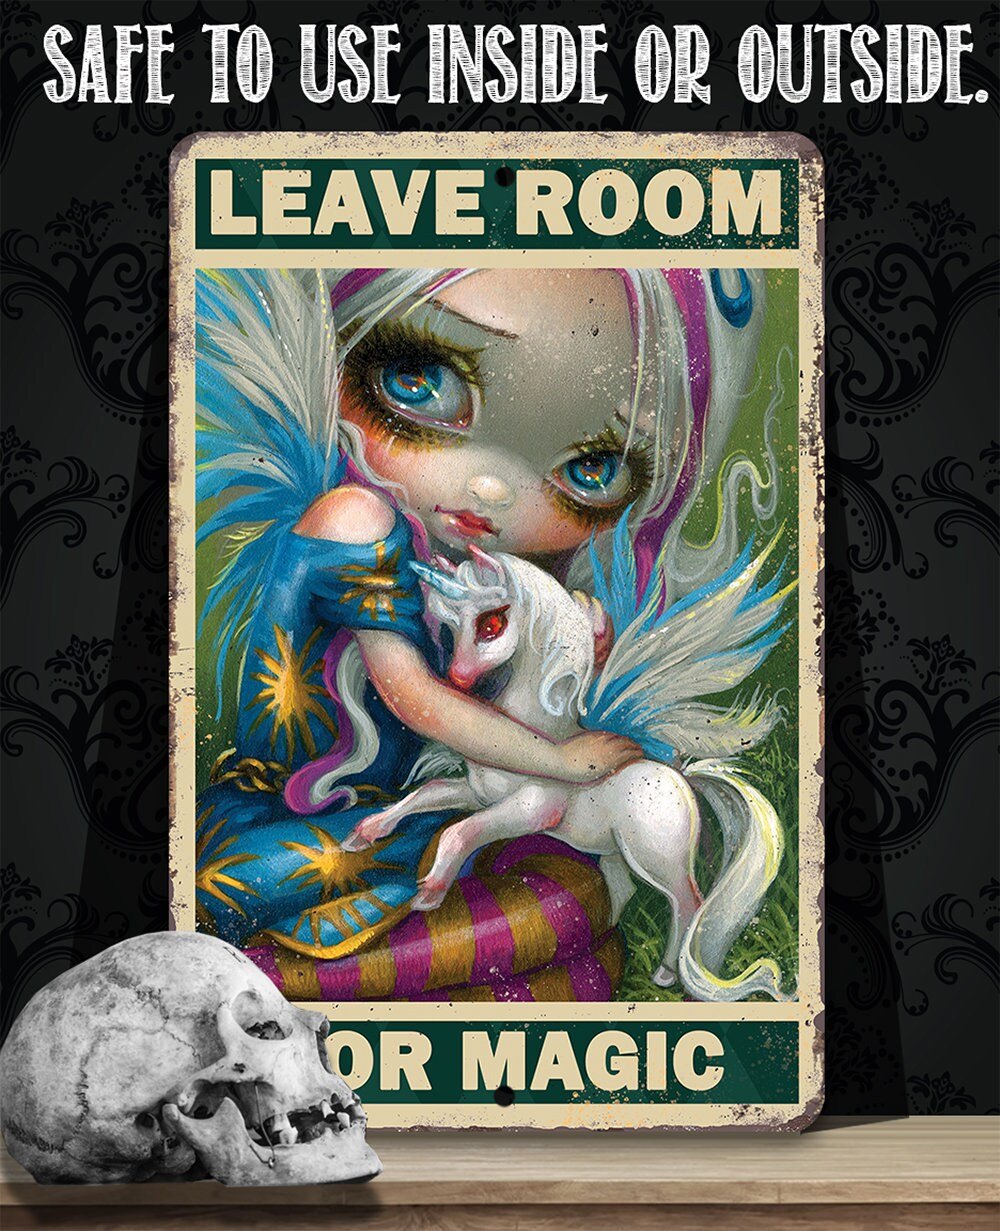 Leave Room For Magic 8" x 12" or 12" x 18" Aluminum Tin Awesome Gothic Metal Poster Lone Star Art 